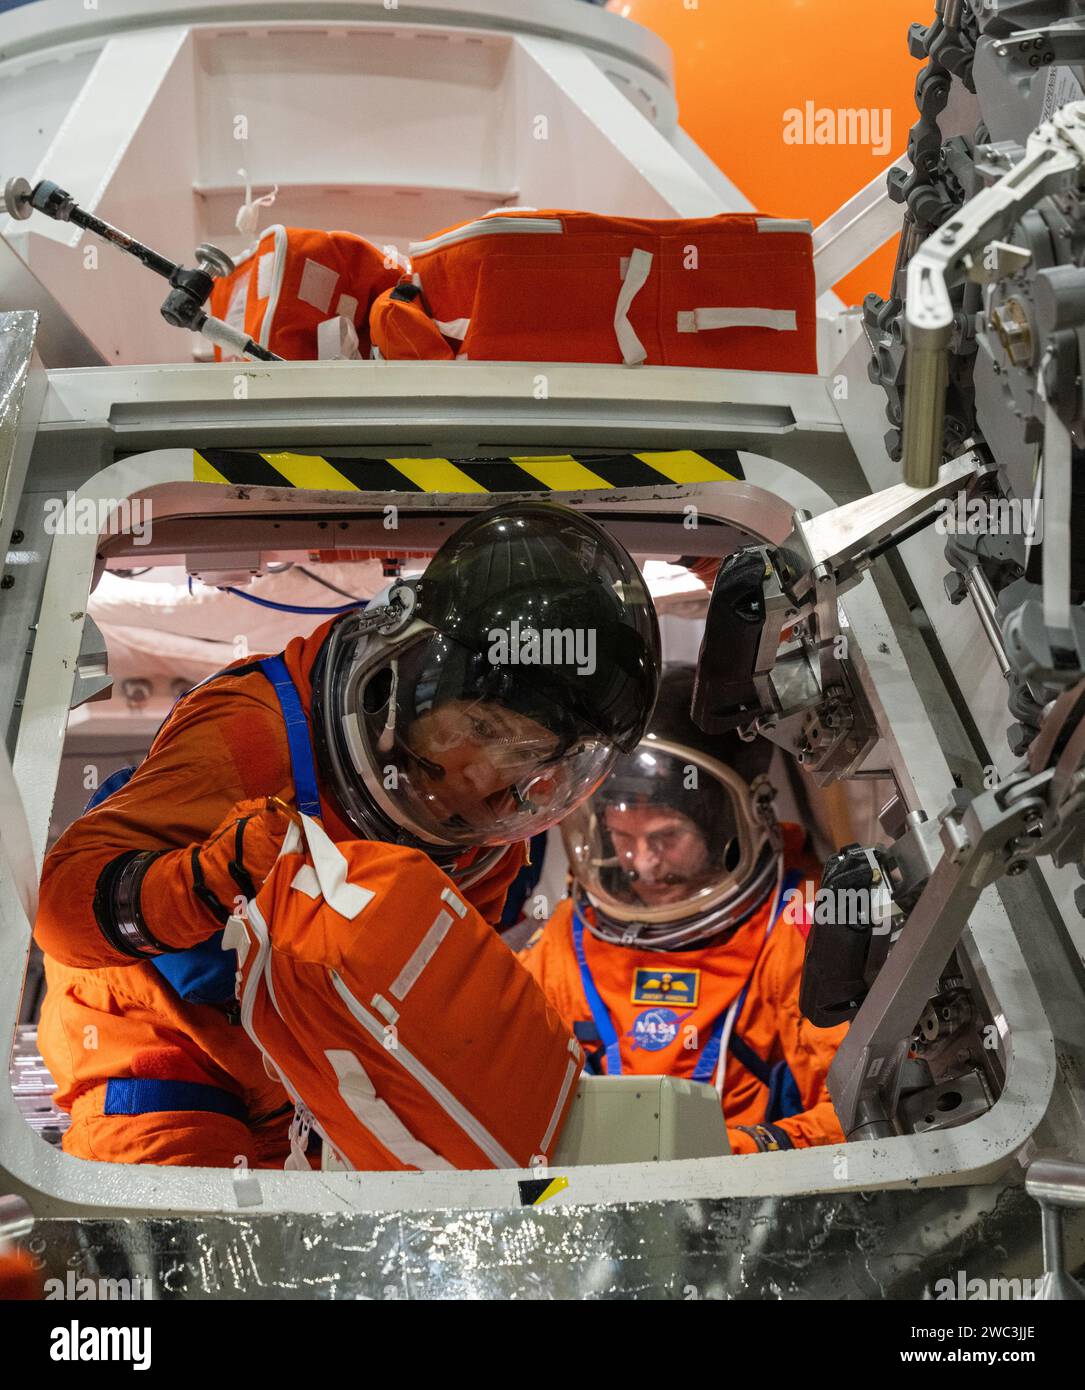 Houston, United States. 08 December, 2023. Inside the Orion Mockup, Artemis II Mission Specialists Christina Koch of NASA, left, and Jeremy Hansen of CSA, during emergency egress training at the Johnson Space Center, December 8, 2023 in Houston, Texas.  Credit: James Blair/NASA/Alamy Live News Stock Photo